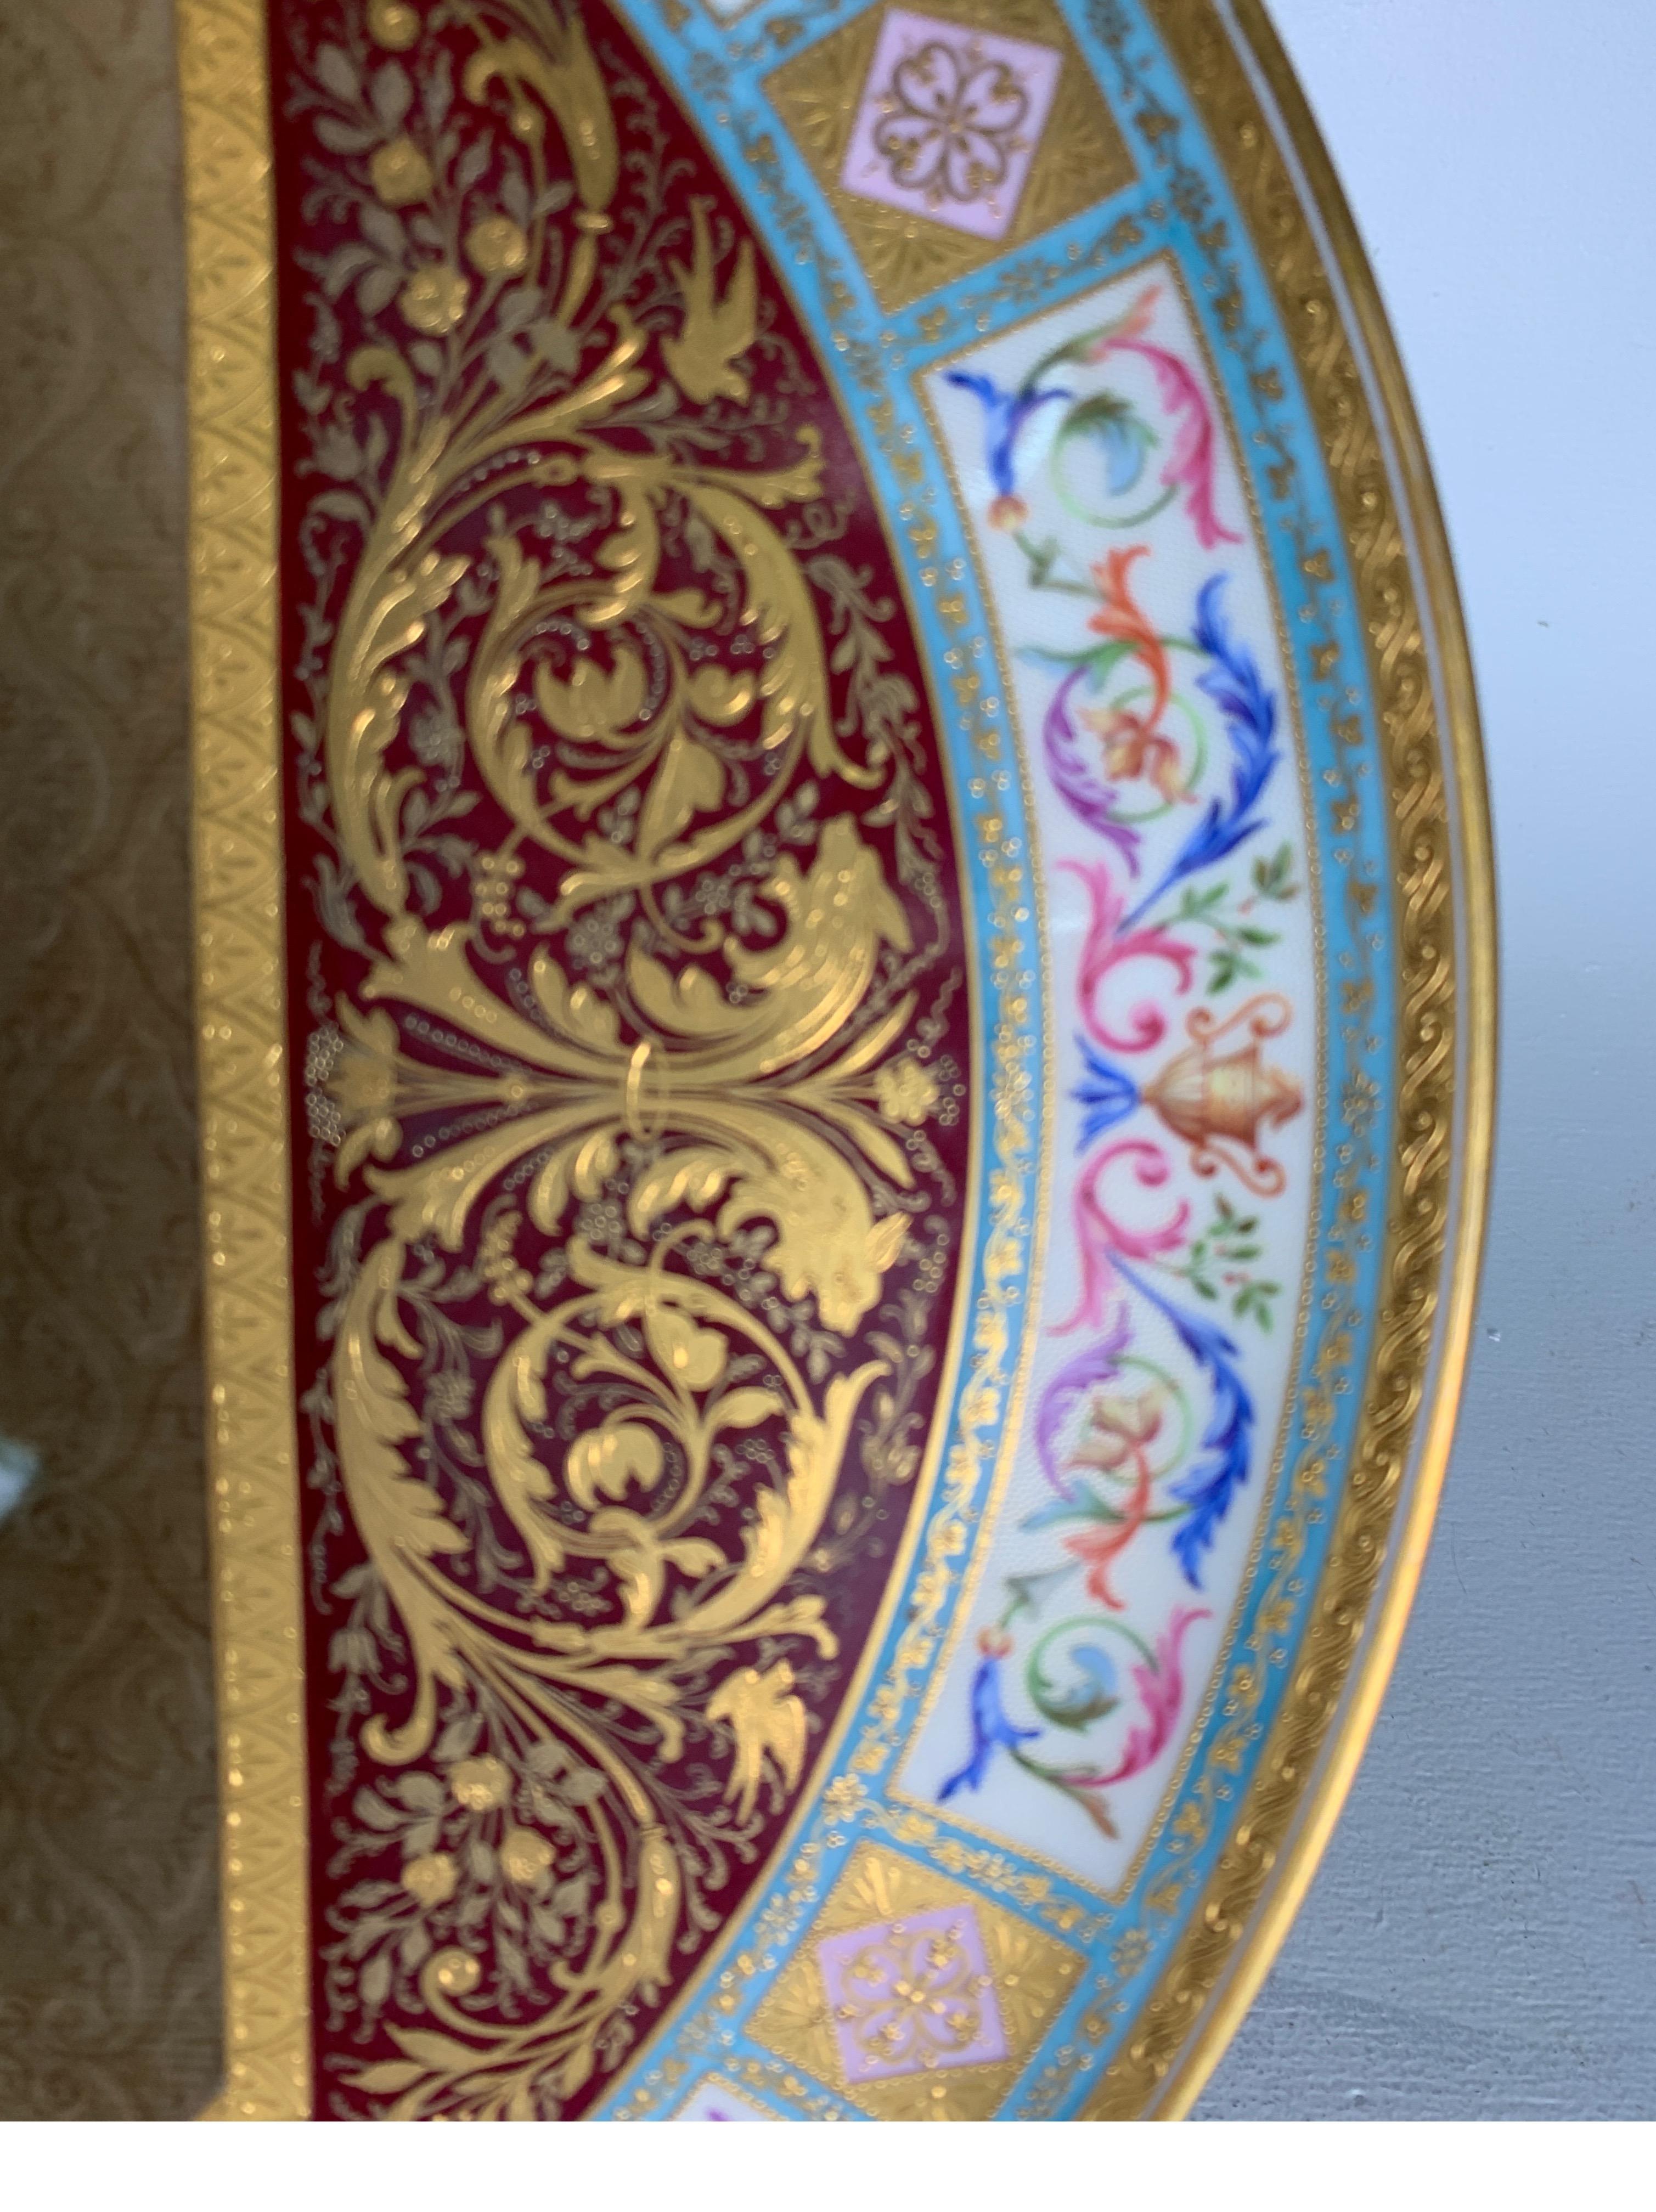 Hand-Painted Large 19th Century Hand Painted Viennese Porcelain Charger, Late 19th Century